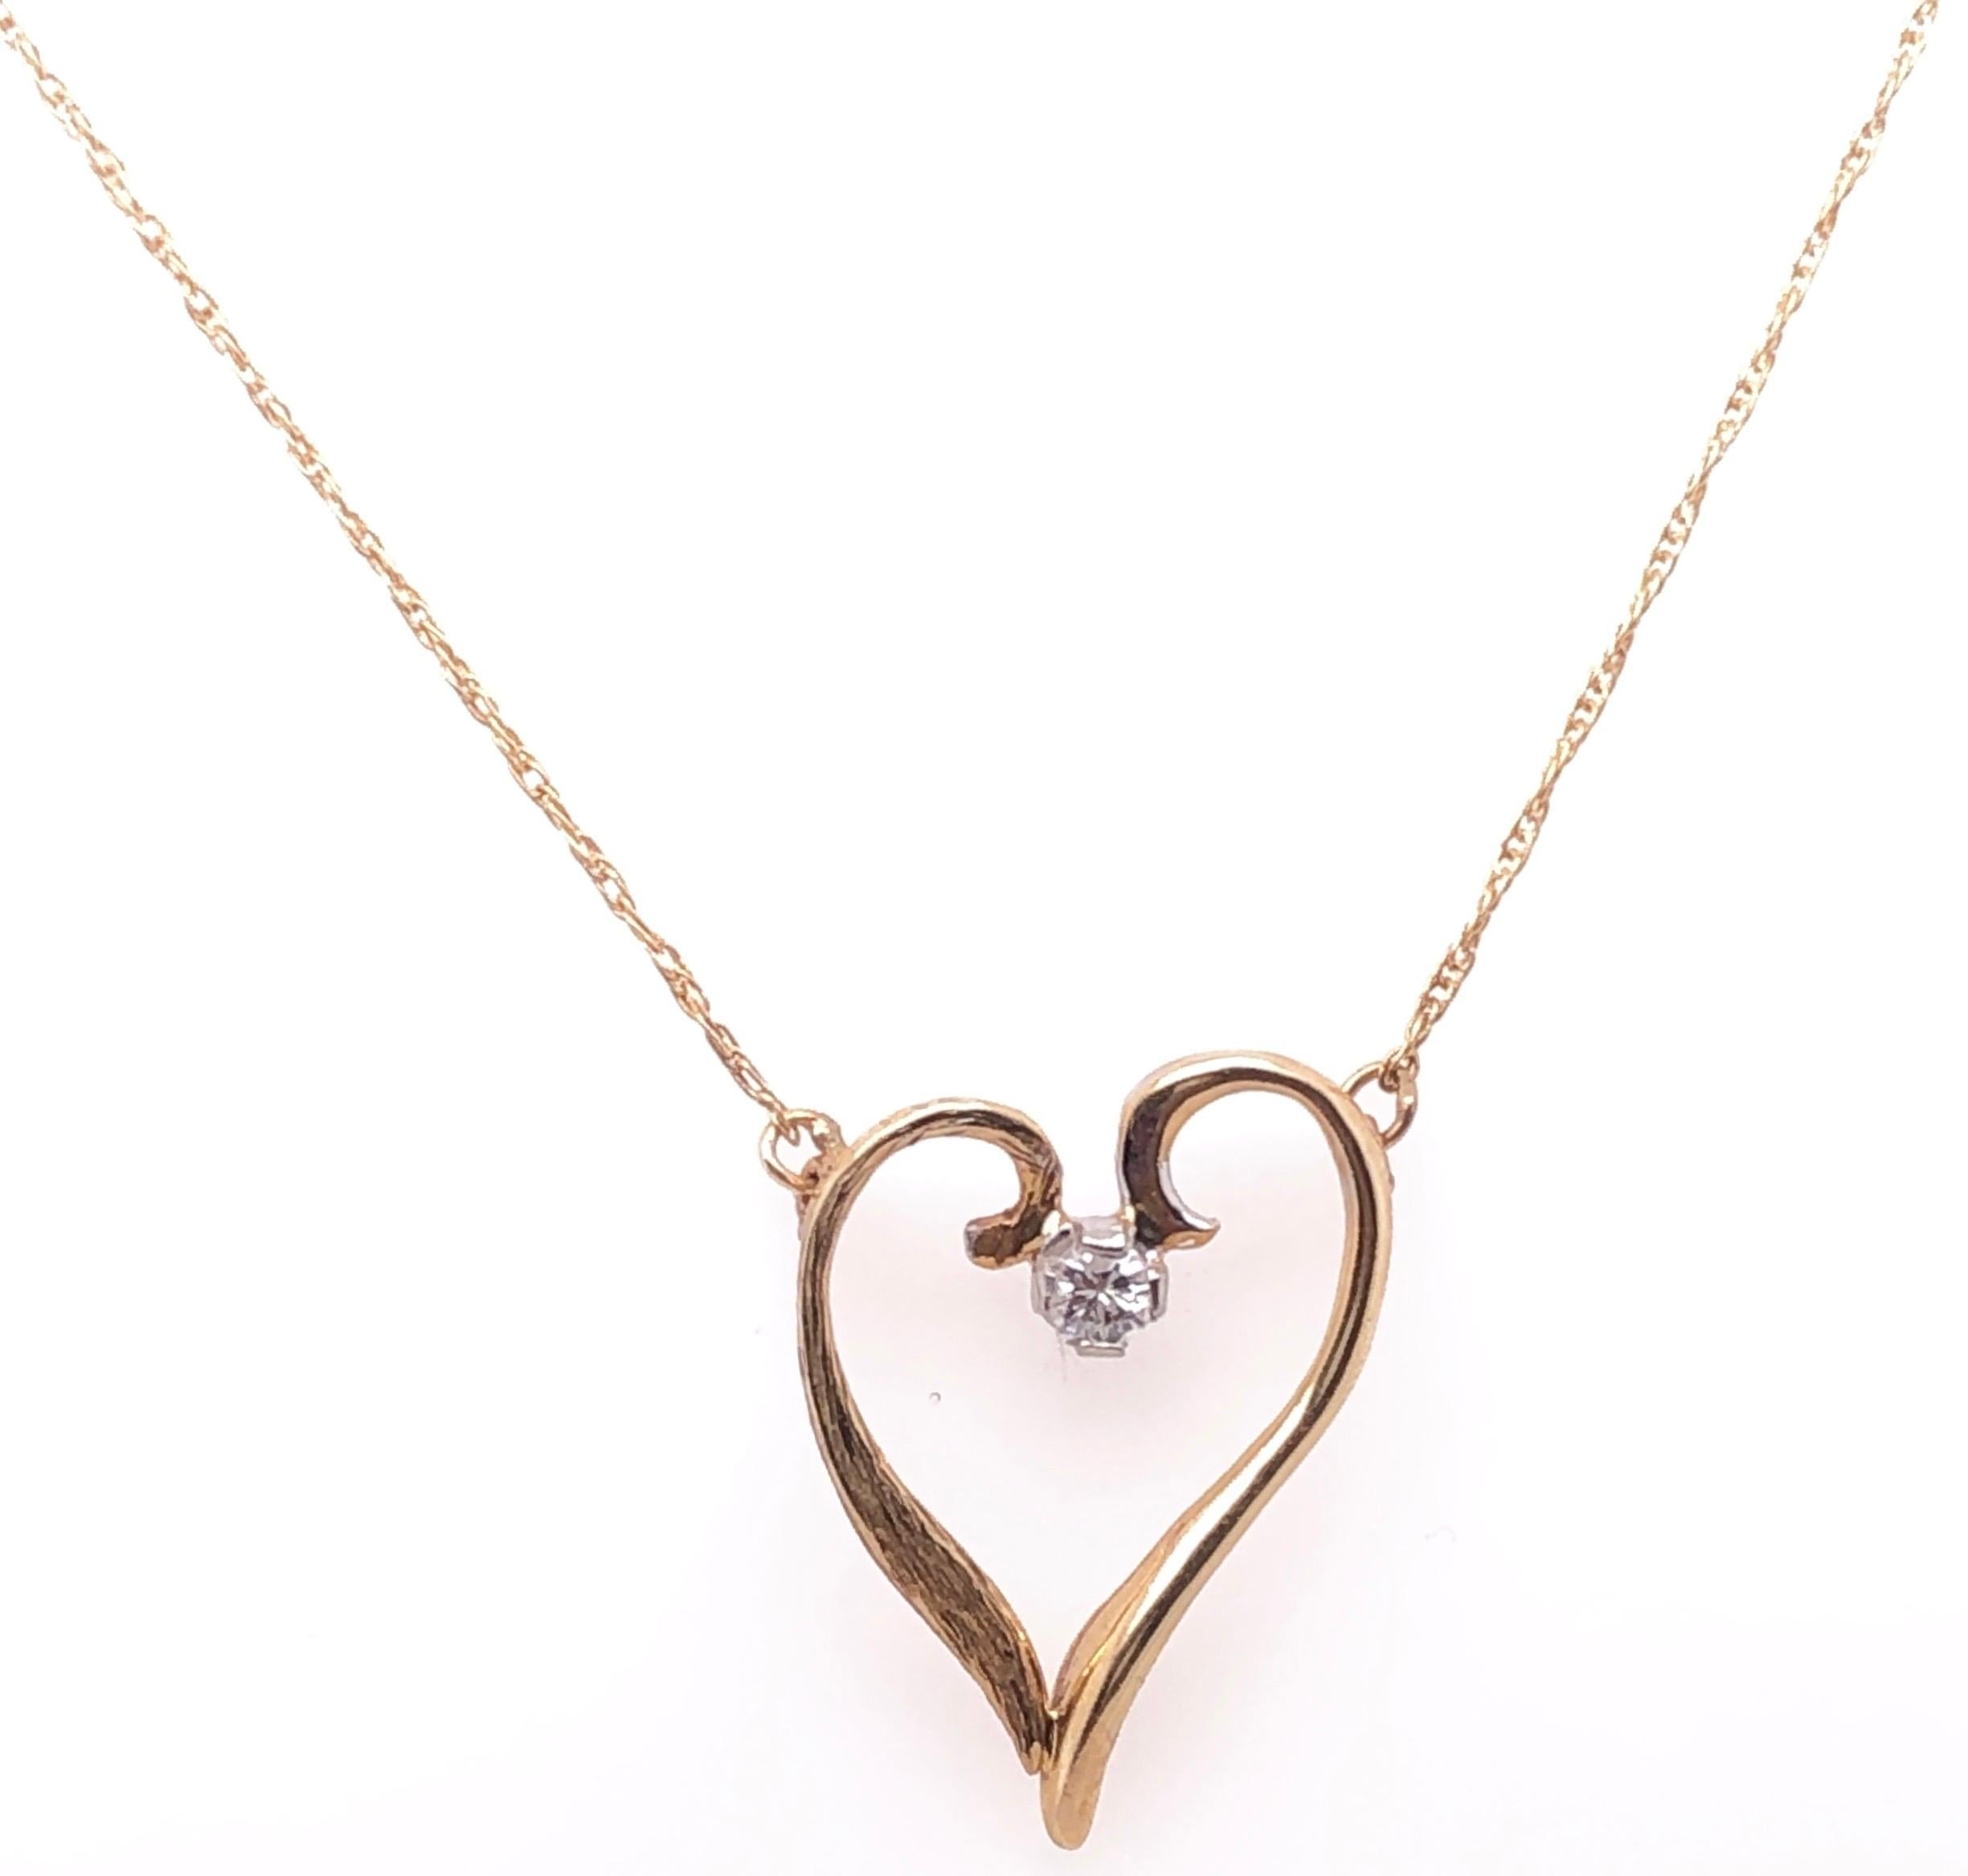 14 Karat Yellow Gold Heart Soldered Pendant with Center Diamond Necklace In Good Condition For Sale In Stamford, CT